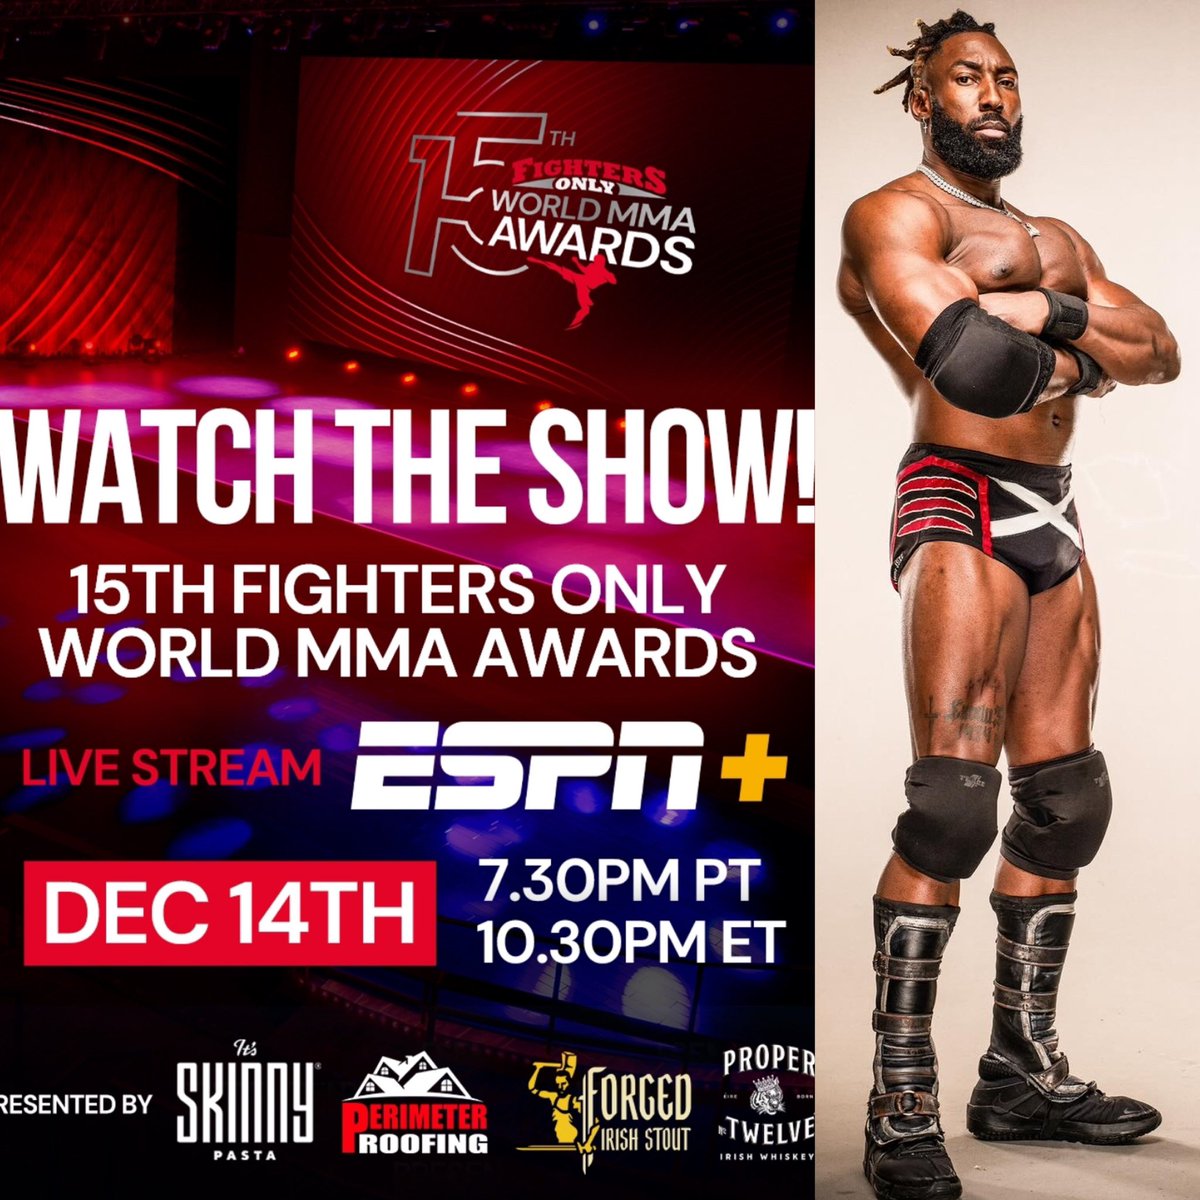 Tomorrow The Judge is in the Building @ESPN @espnmma @FightersOnly @WorldMMAAwards